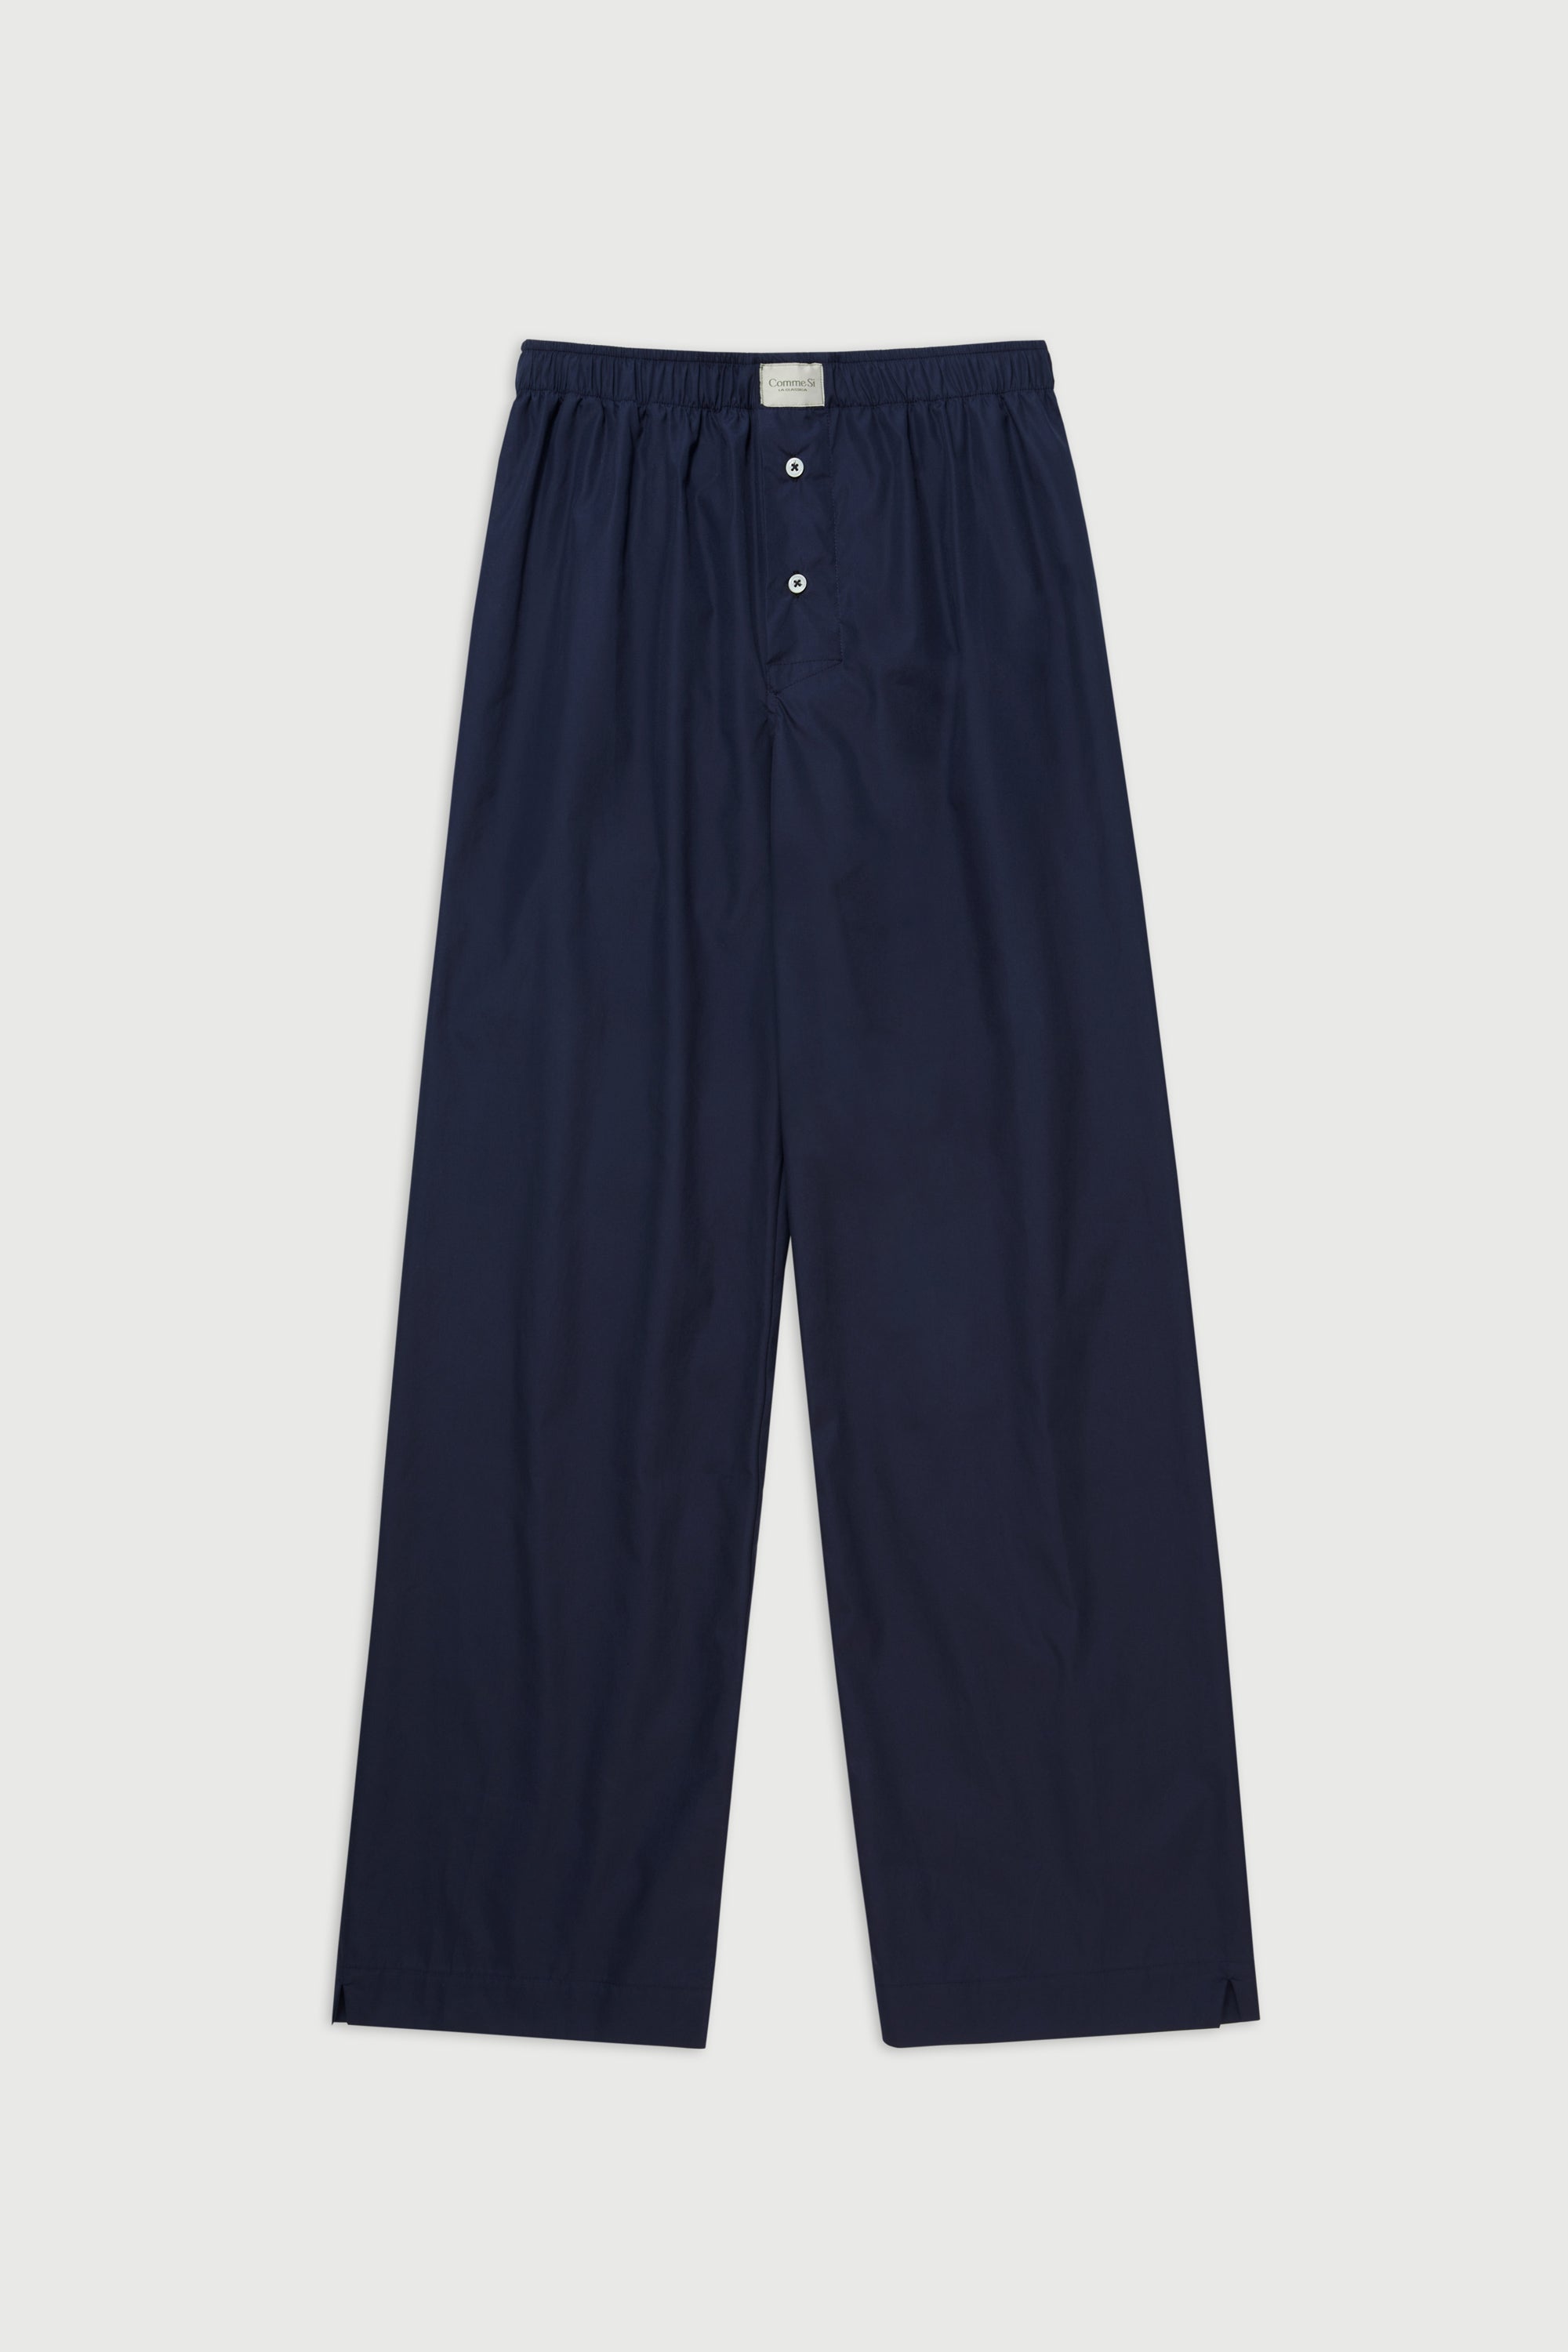 ZARA NEW WOMAN SS24 NAVY BLUE CONTRAST BOXER TROUSERS REF:7385/401